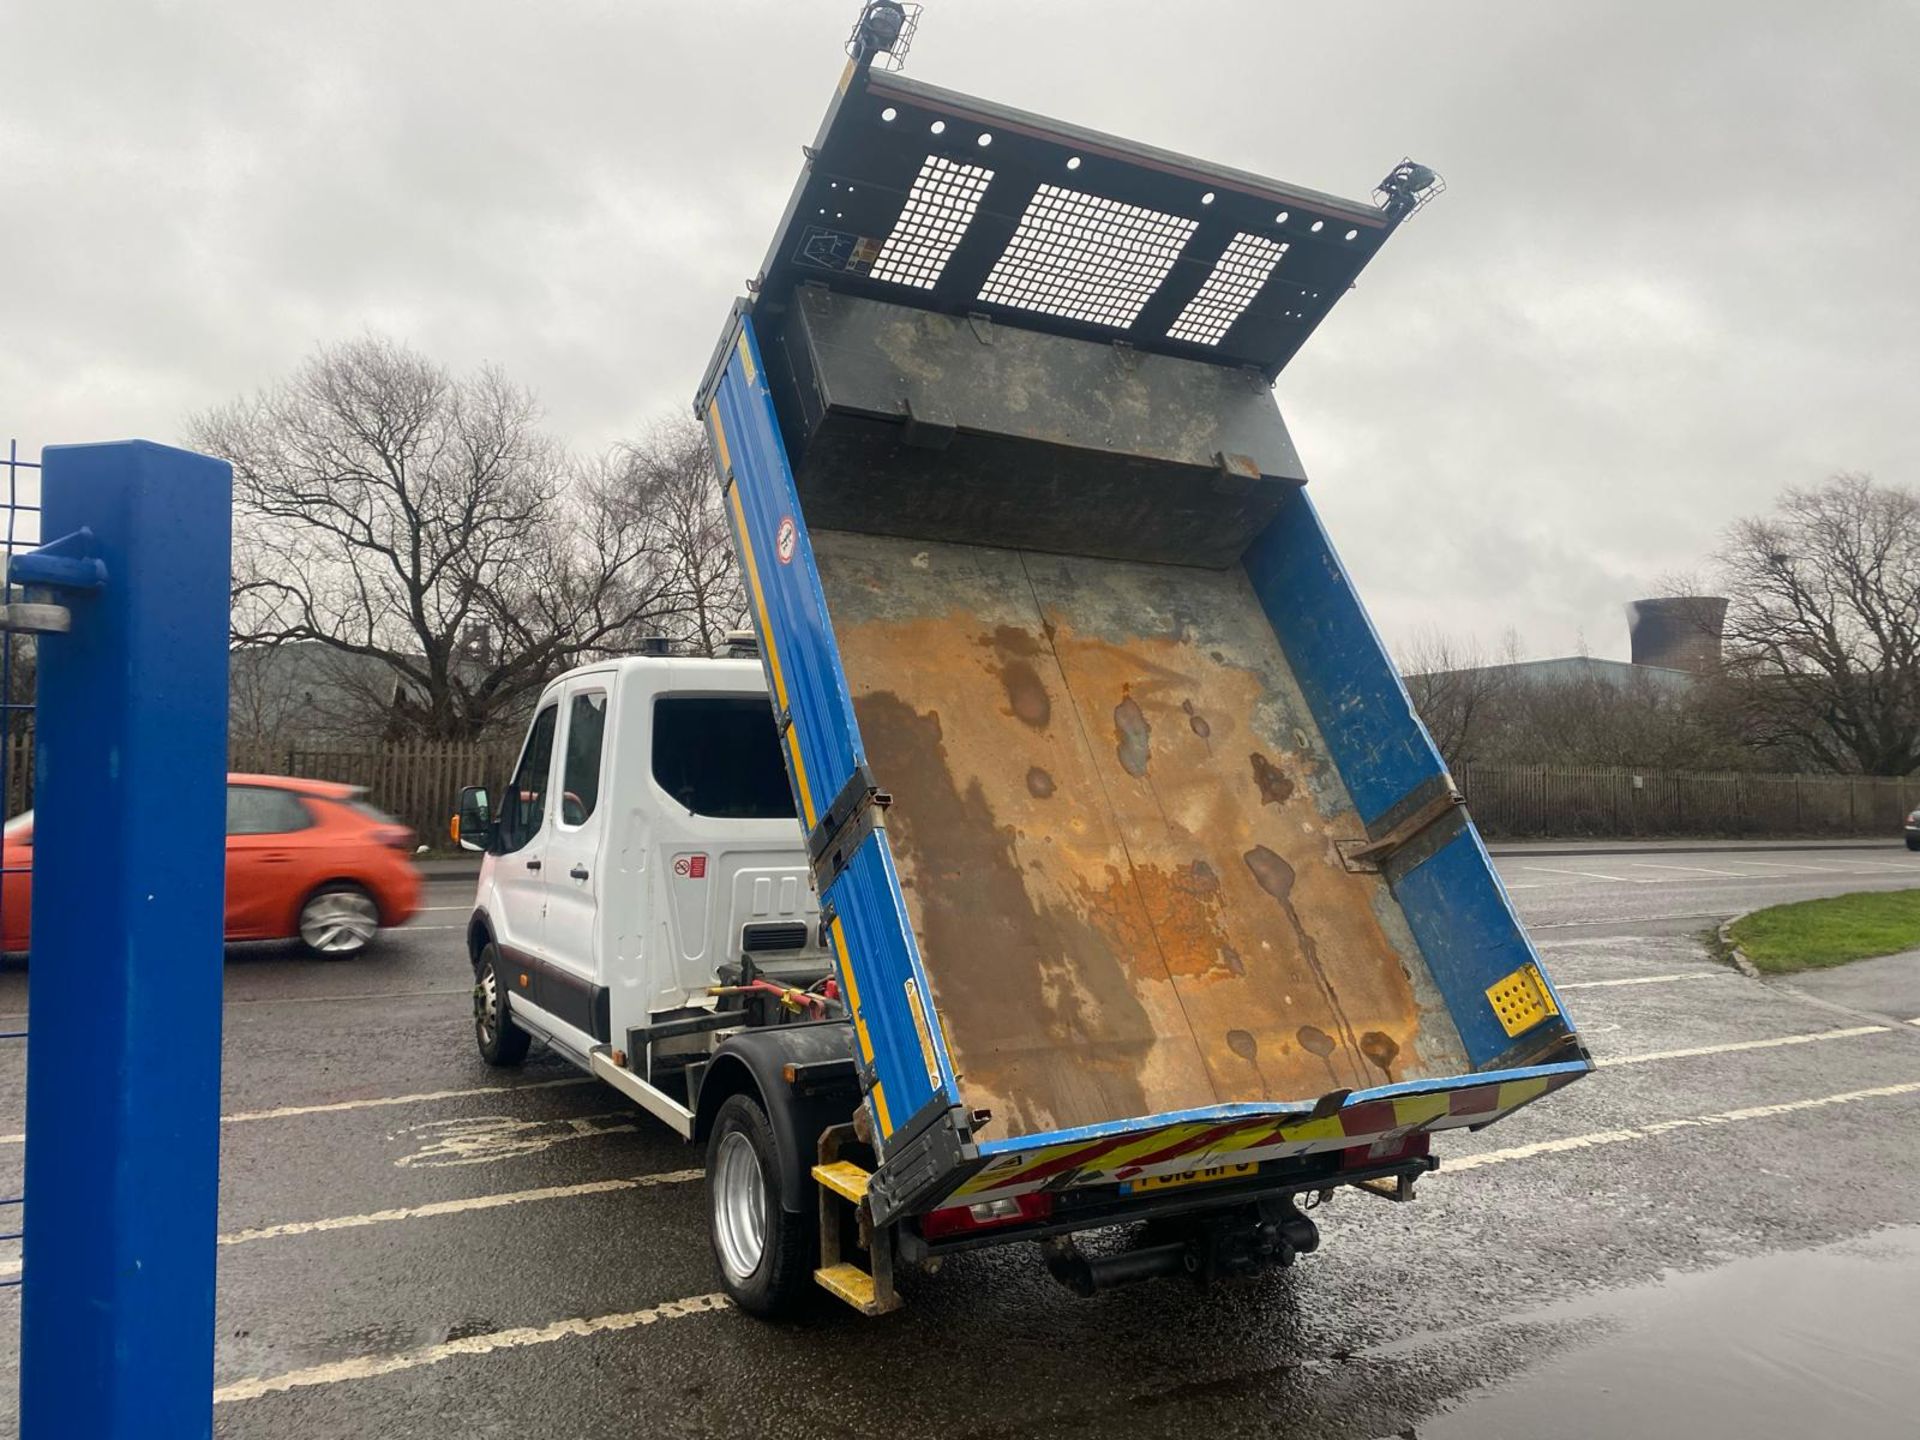 2018 18 FORD TRANSIT 470 TIPPER - 90K MILES - 4.7 TON GROSS - 3 SEATS - RARE TIPPER - TOWBAR. - Image 14 of 15